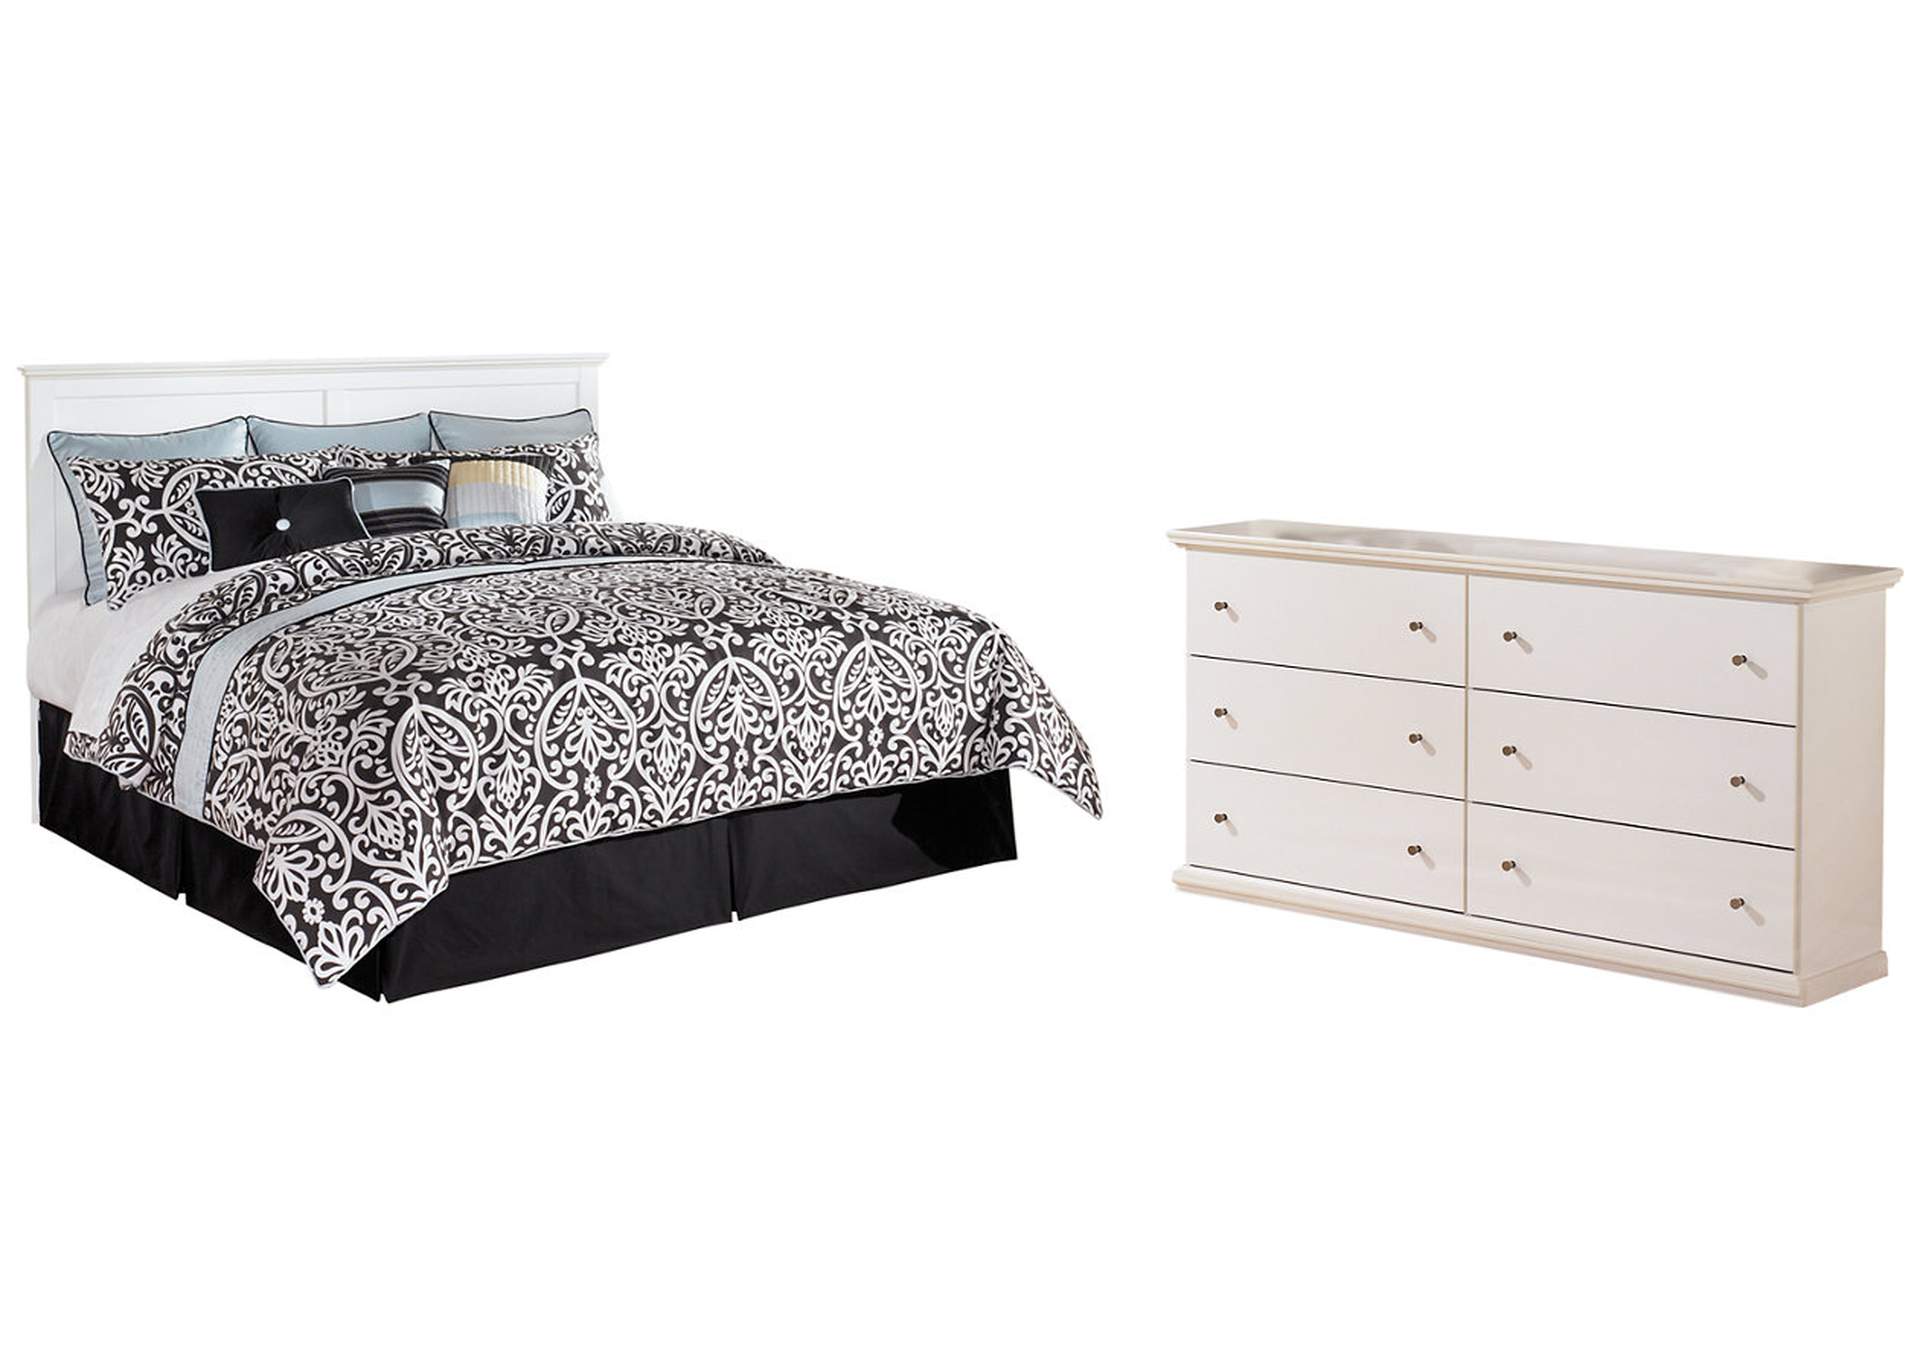 Bostwick Shoals King/California King Panel Headboard Bed with Dresser,Signature Design By Ashley